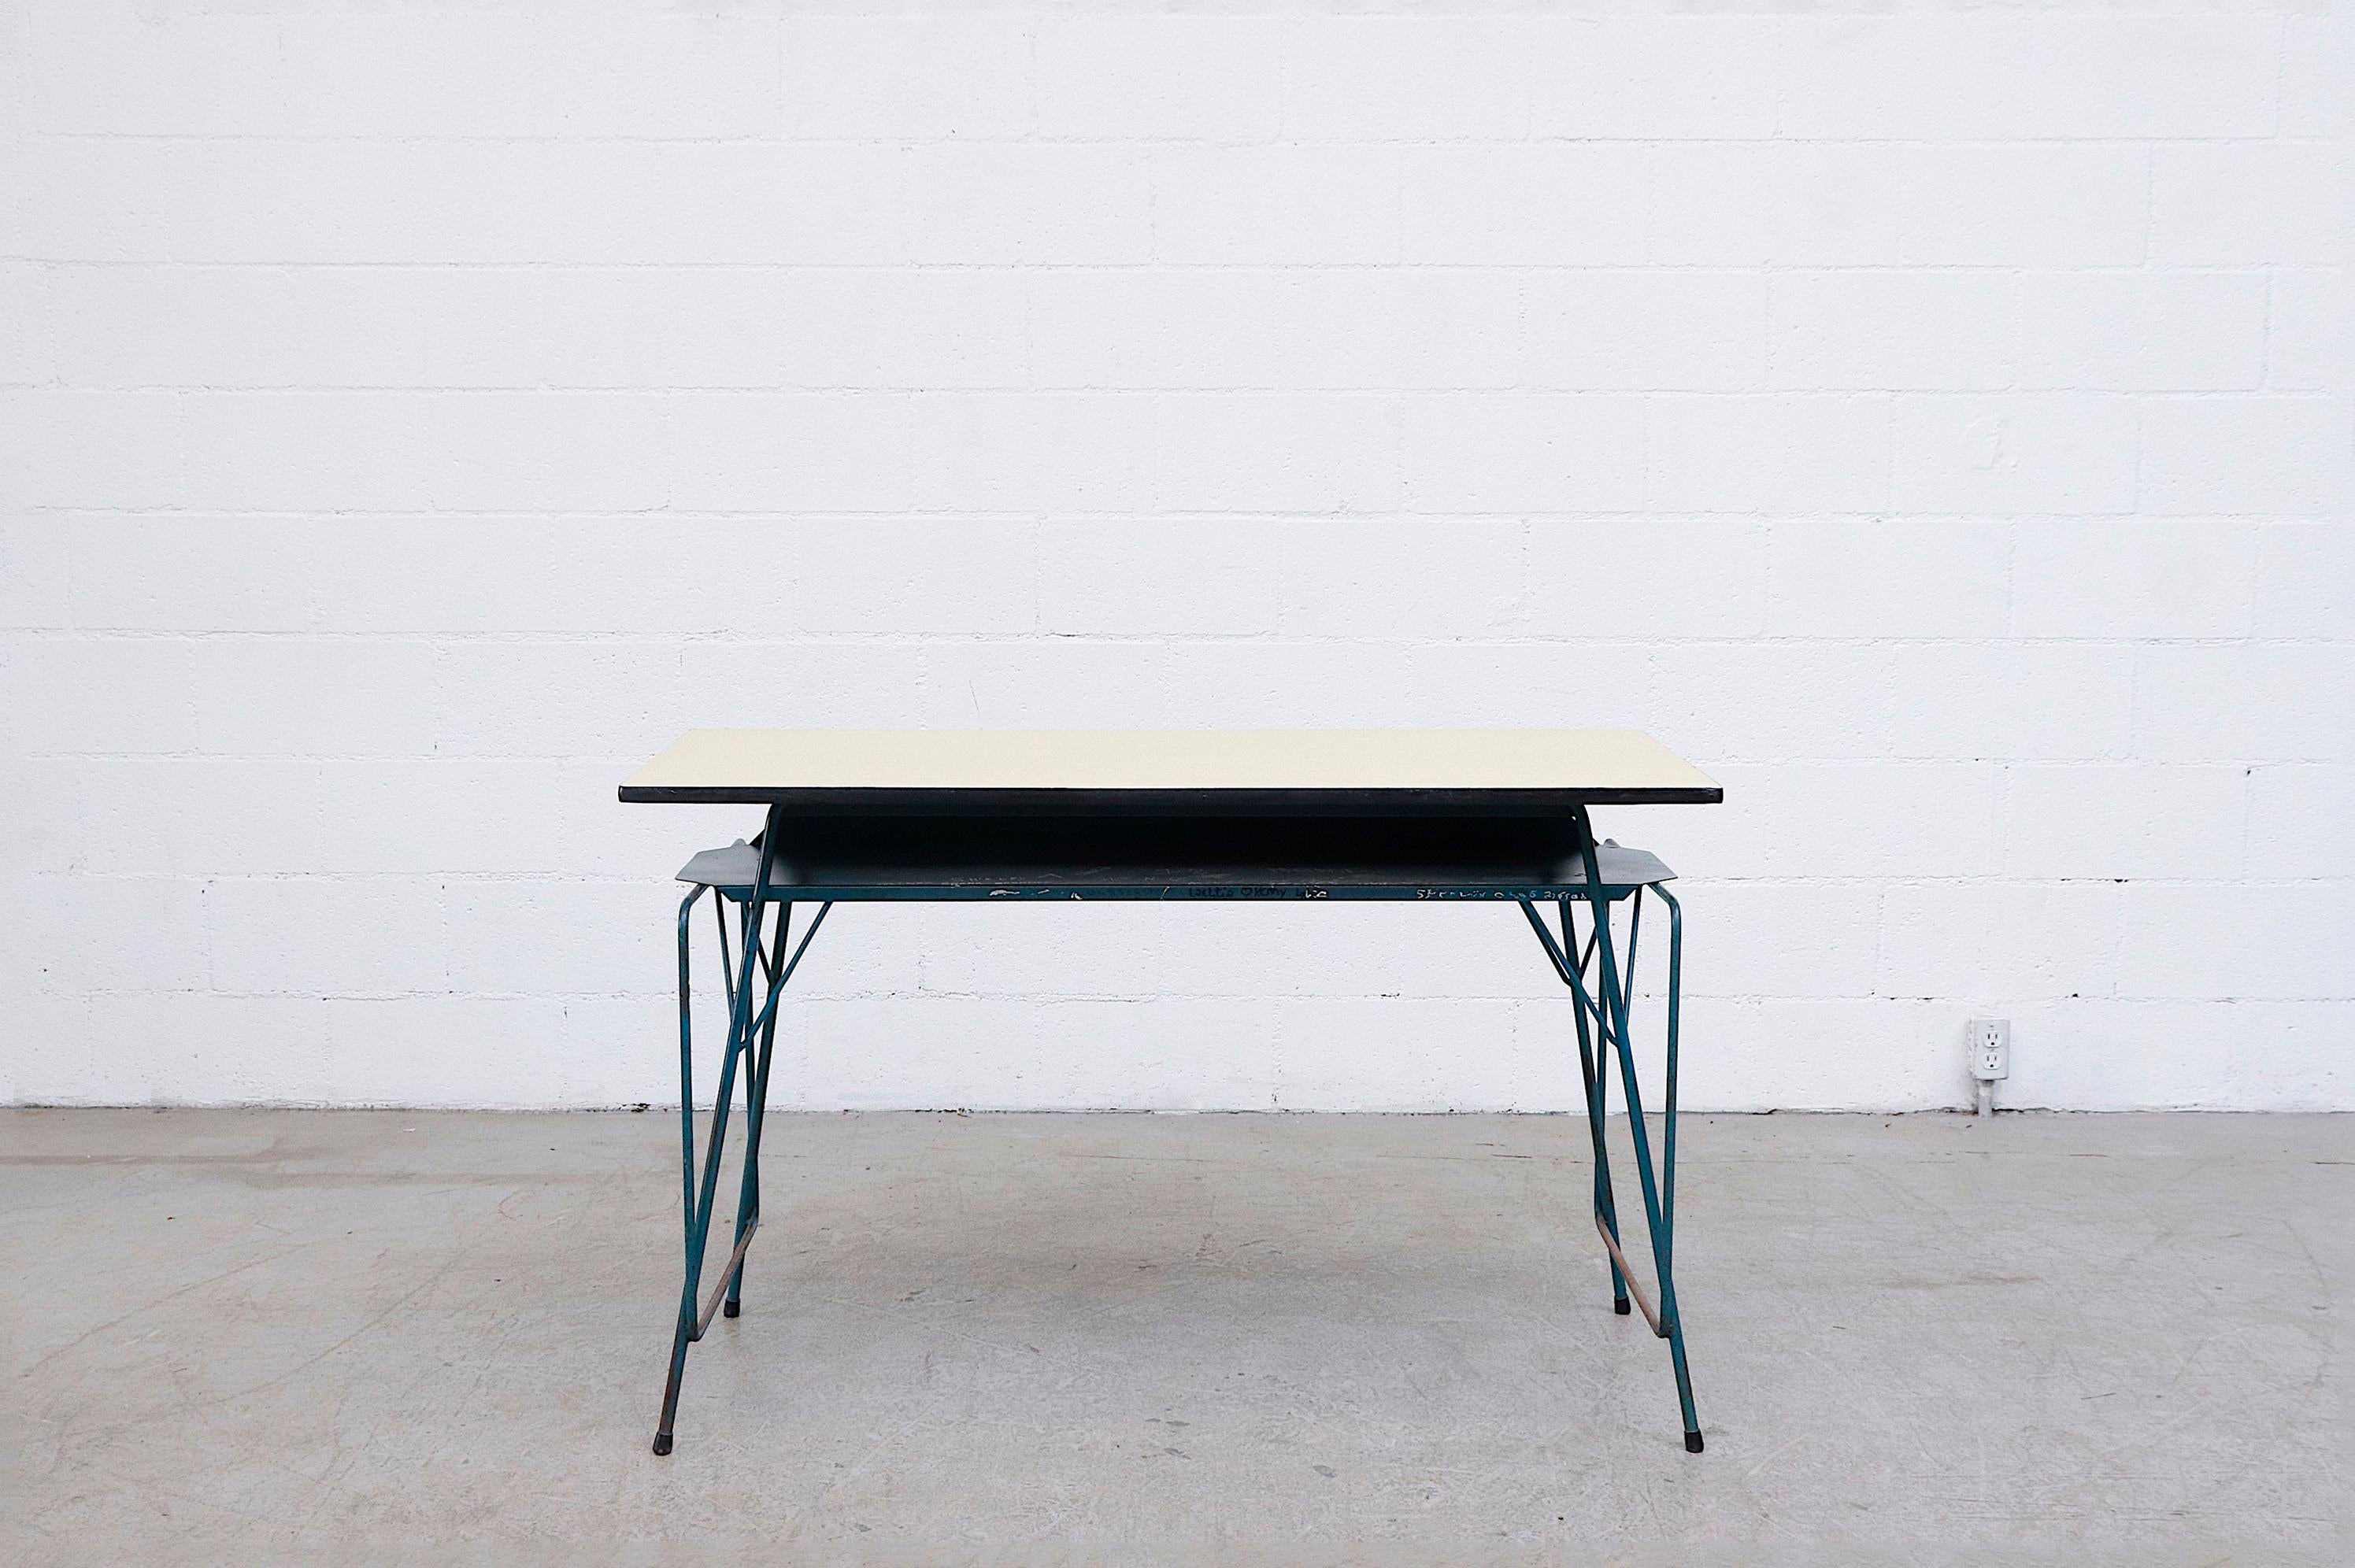 Midcentury Willy Van Der Meeren Industrial desk with Formica top and teal enameled tubular metal frame. In original condition with visible wear. Wear is consistent with it's age and use. This one has prominent graffiti, others available in varying